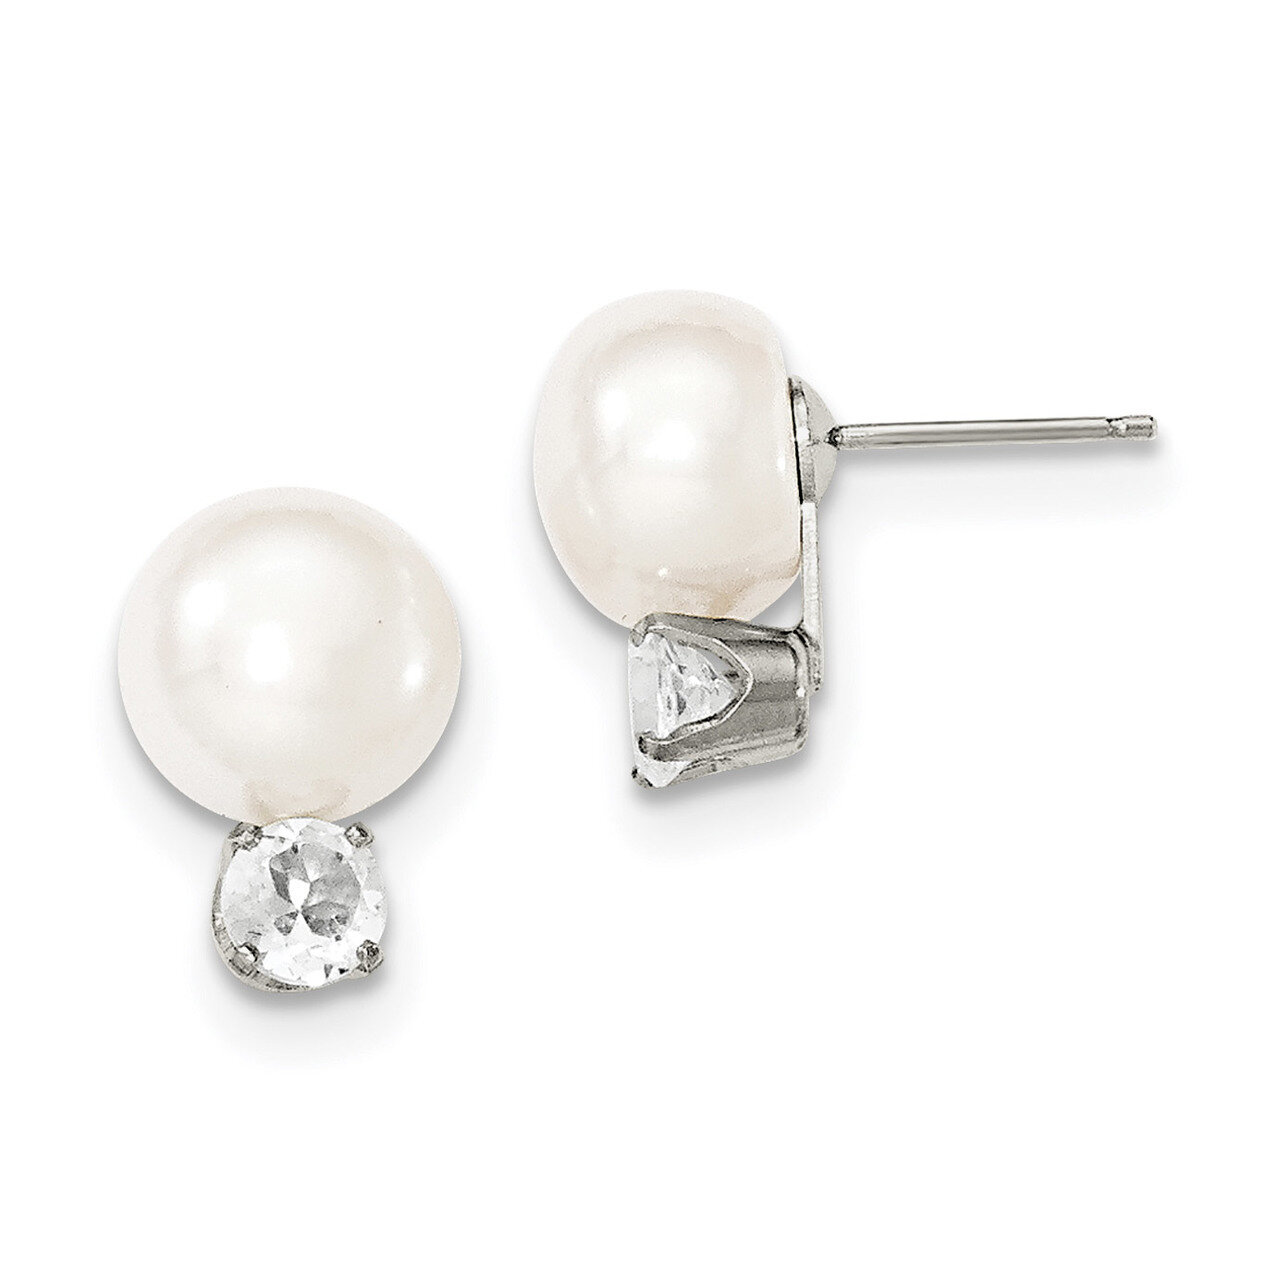 10-11mm Freshwater Cultured Button Pearl with White Topaz Earrings Sterling Silver QE12801